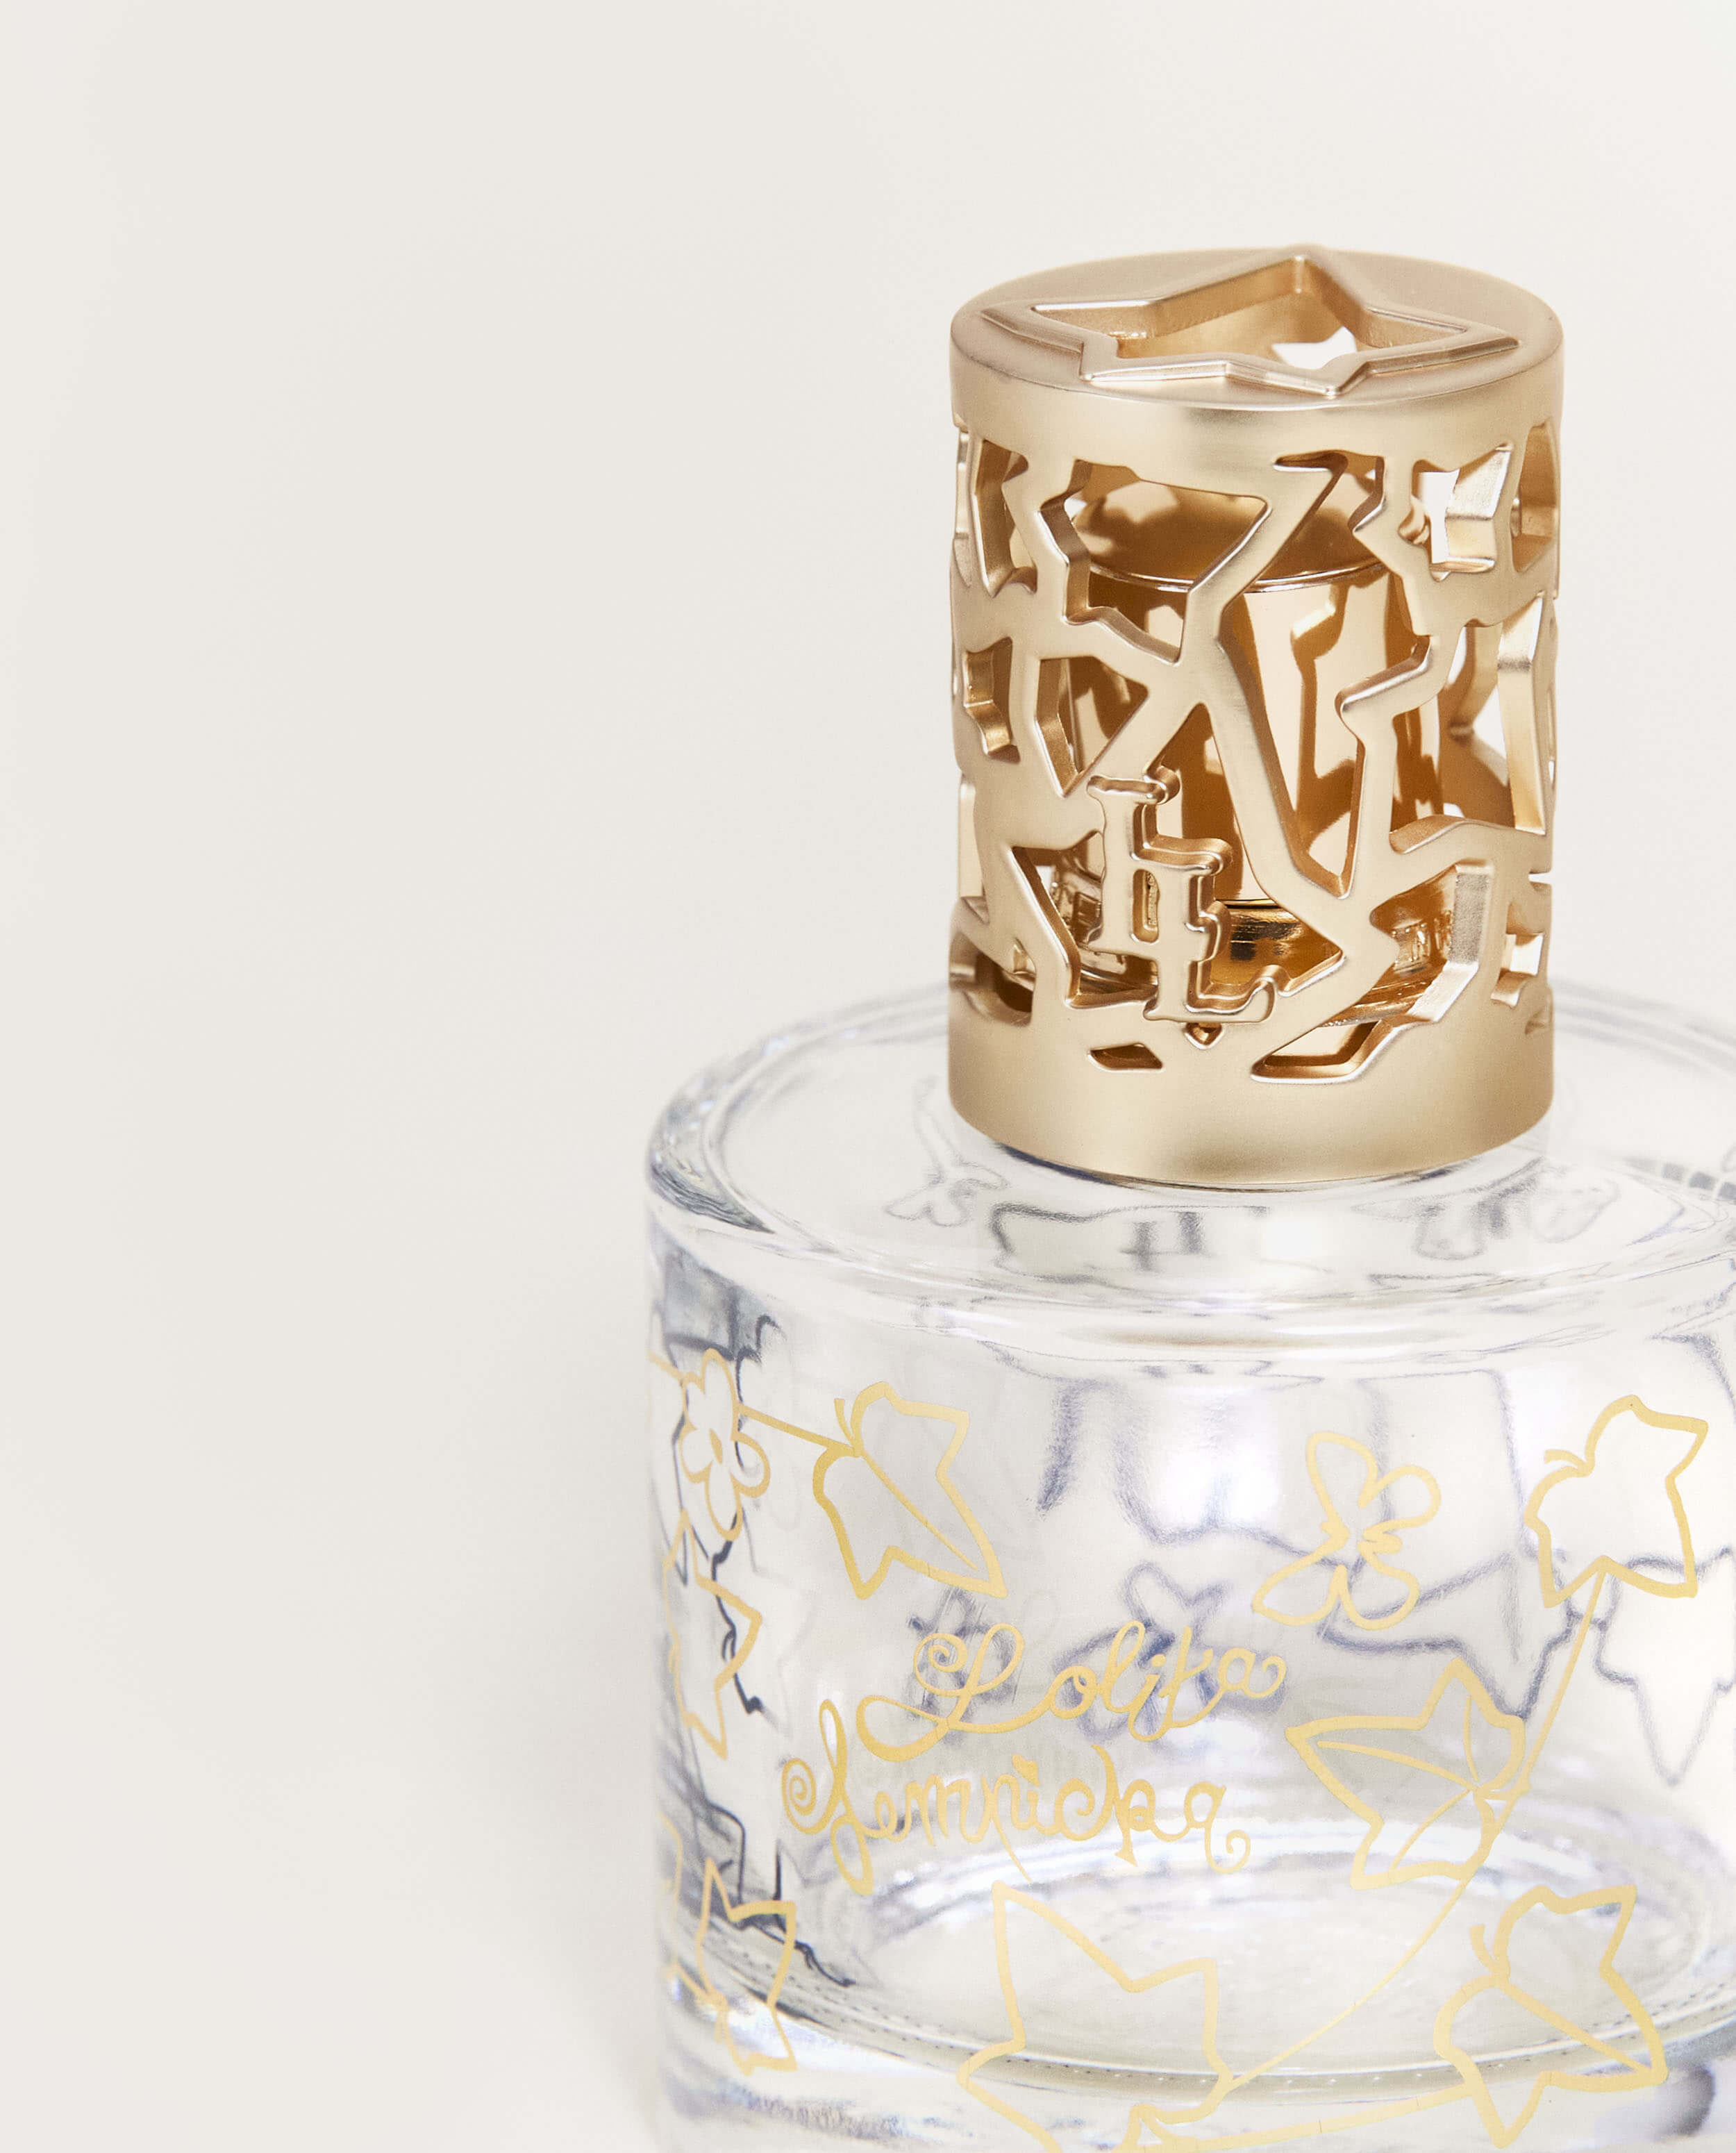 Lampe Berger (Maison Berger Paris) Bijou Scented Bouquet - Lolita Lempicka  (Clear) 115ml/3.8oz 115ml/3.8oz buy in United States with free shipping  CosmoStore